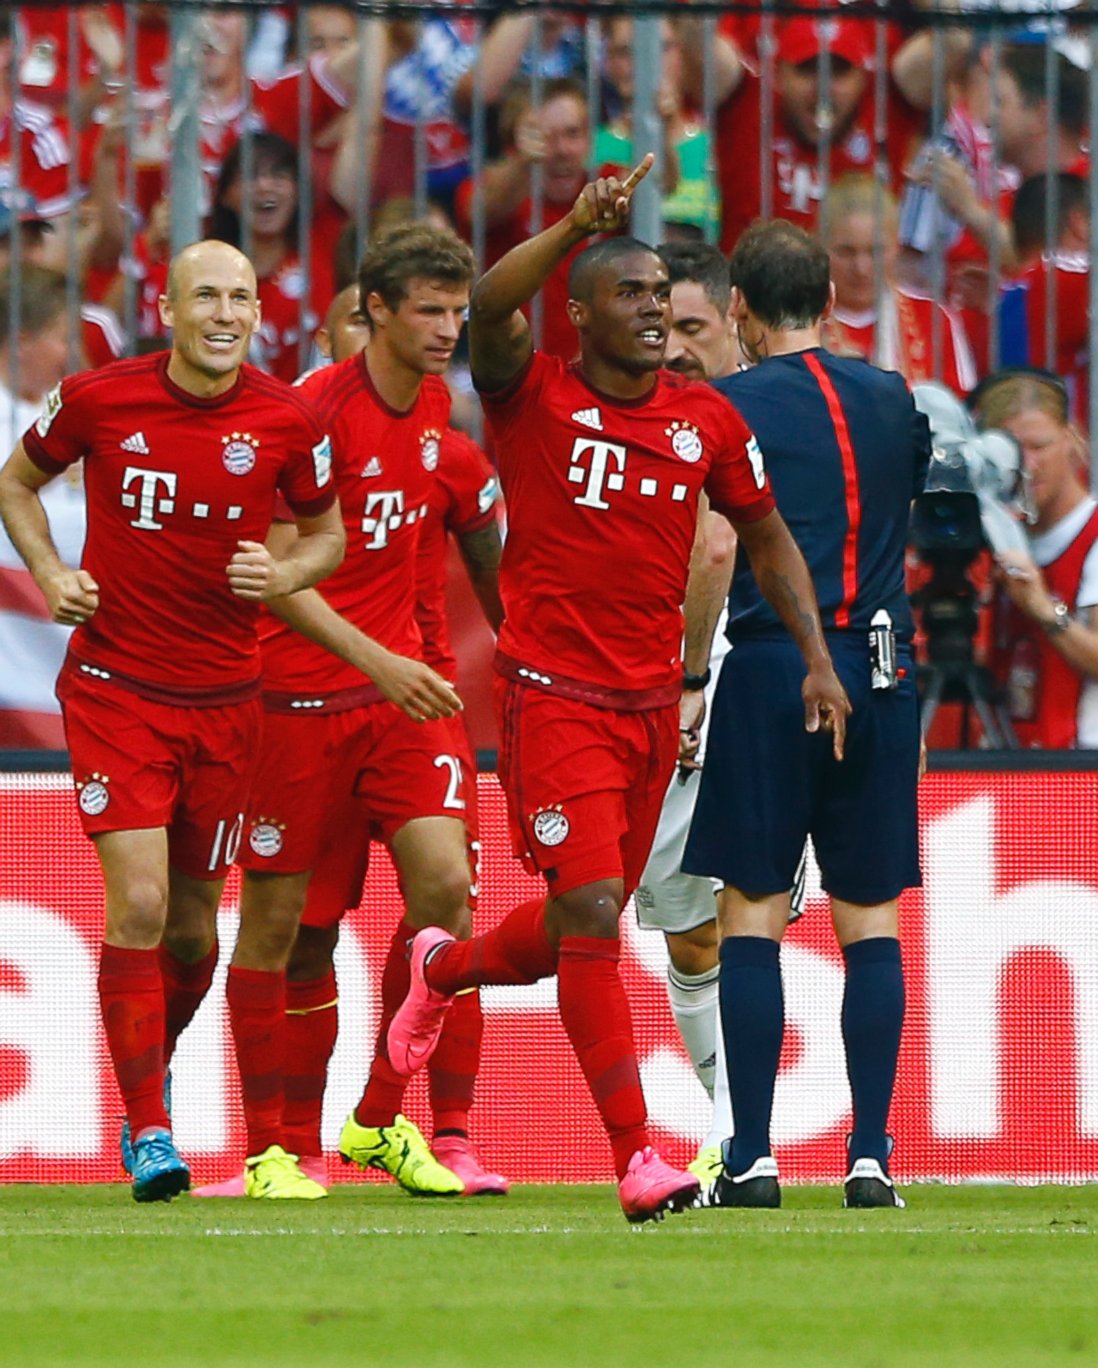 PHOTO: Bayern's Douglas Costa celebrates after teammate Thomas Mueller, scored his side's opening goal during the German Bundesliga soccer match between FC Bayern Munich and Bayer Leverkusen in Munich, Germany, Aug. 29, 2015.